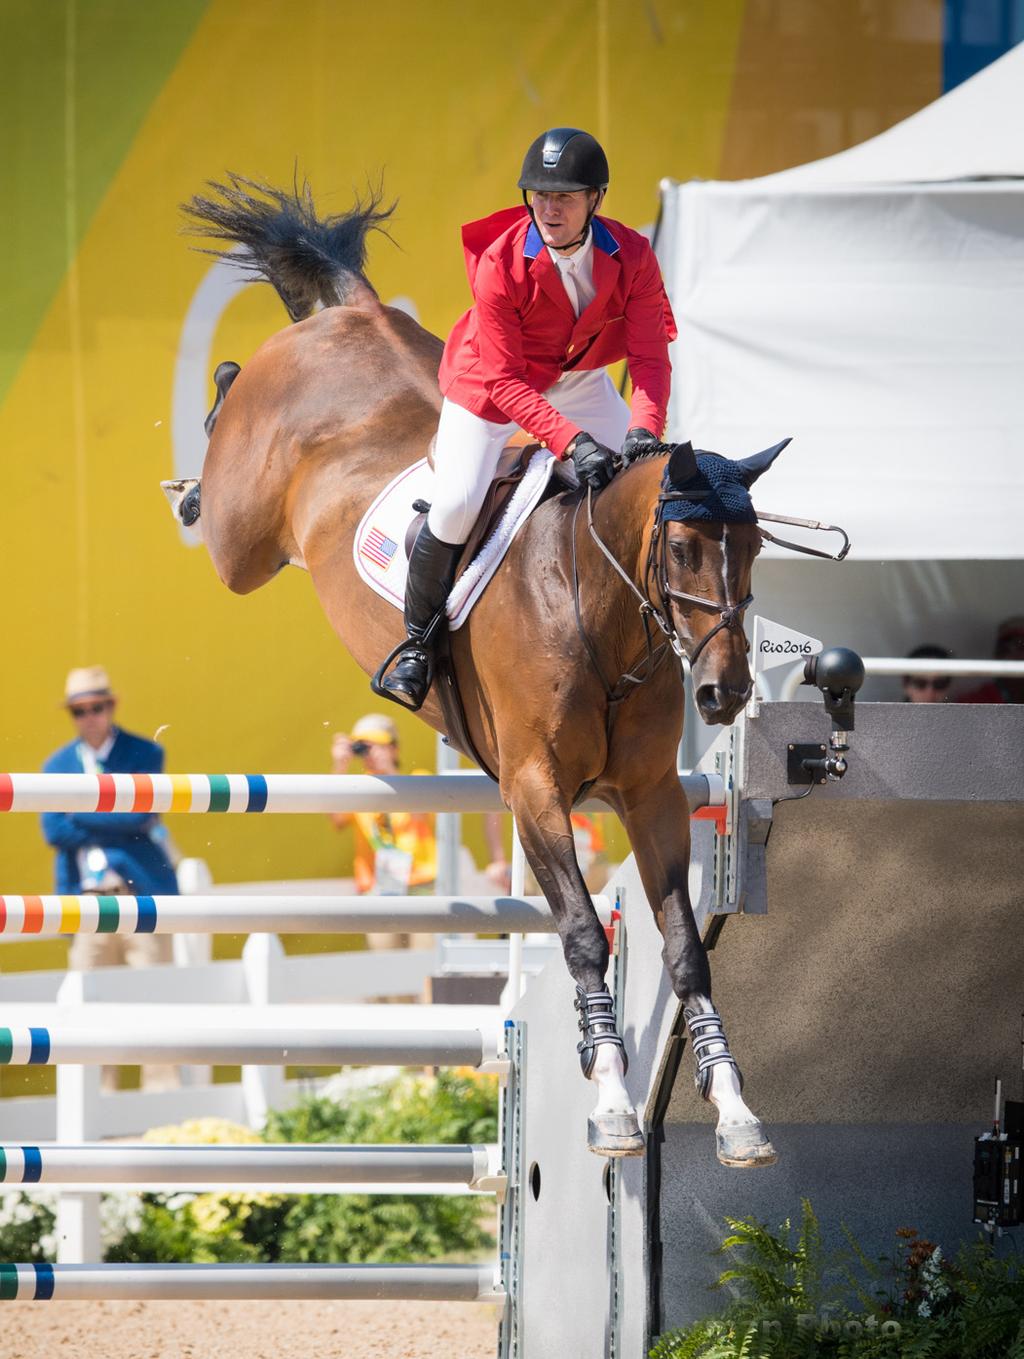 RULES & REGULATIONS USEF Competition Name: HORSE SHOWS, SNOWBIRD AUGUST I USEF #s: 1663, 337223, 320927, 1664, 317369, 320178 Competition Divisions and Ratings: ALL REGULAR MEMBER COMPETITIONS RUN IN